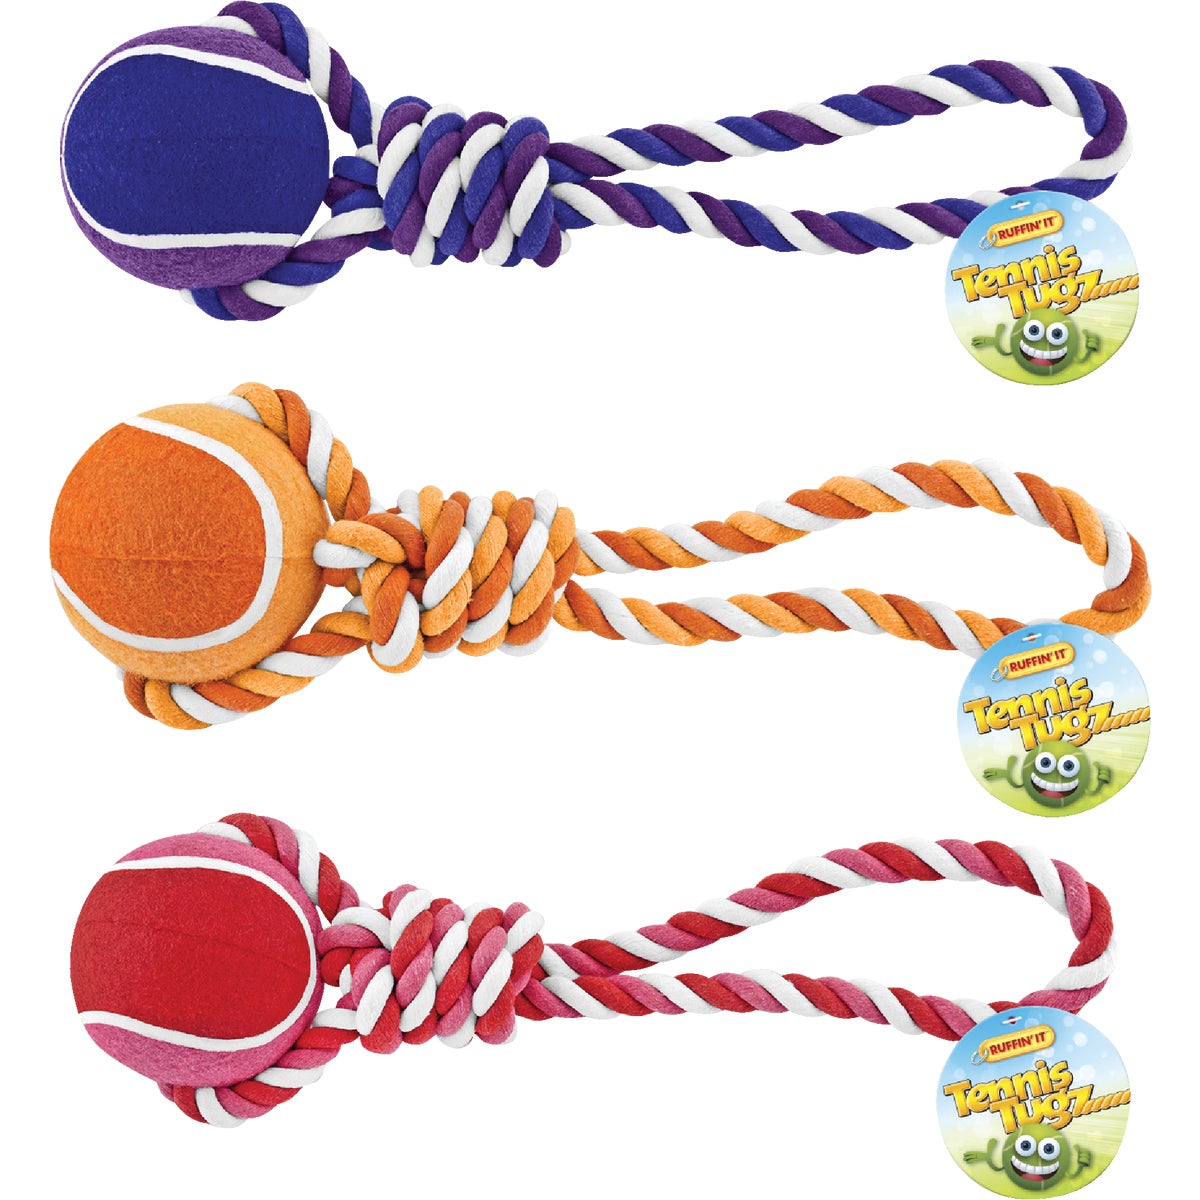 Item 741902, Classic rope tug toy featuring a tennis ball for games of tug and fetch.